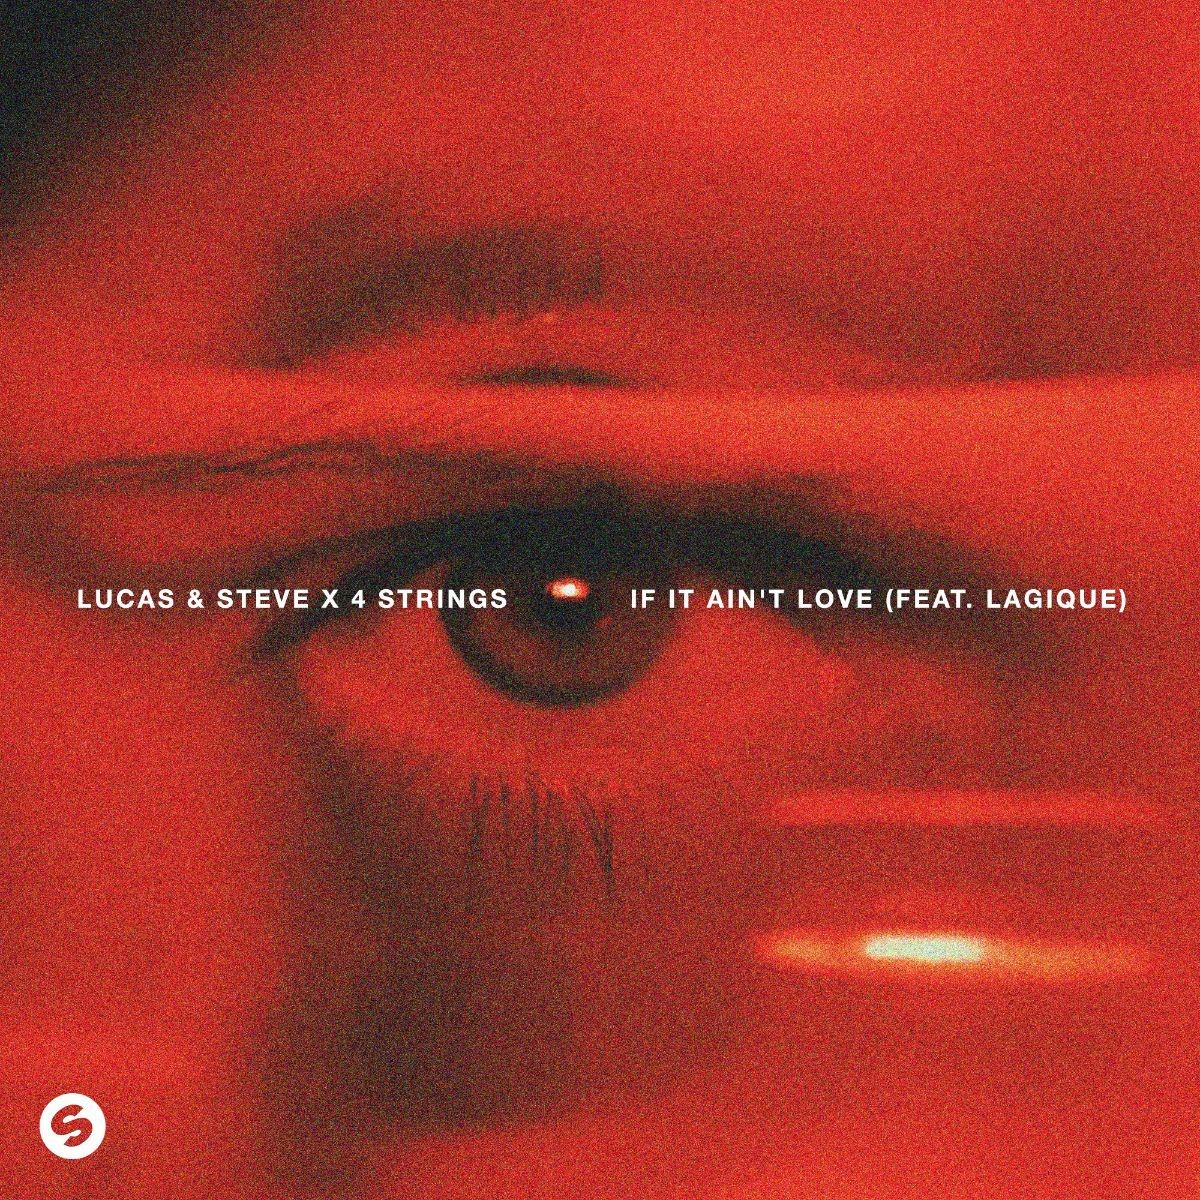 Lucas & Steve X 4 Strings Revive Trance Classic Into Sultry Pop Tune ‘If It Ain’t Love’ (feat. Lagique)!